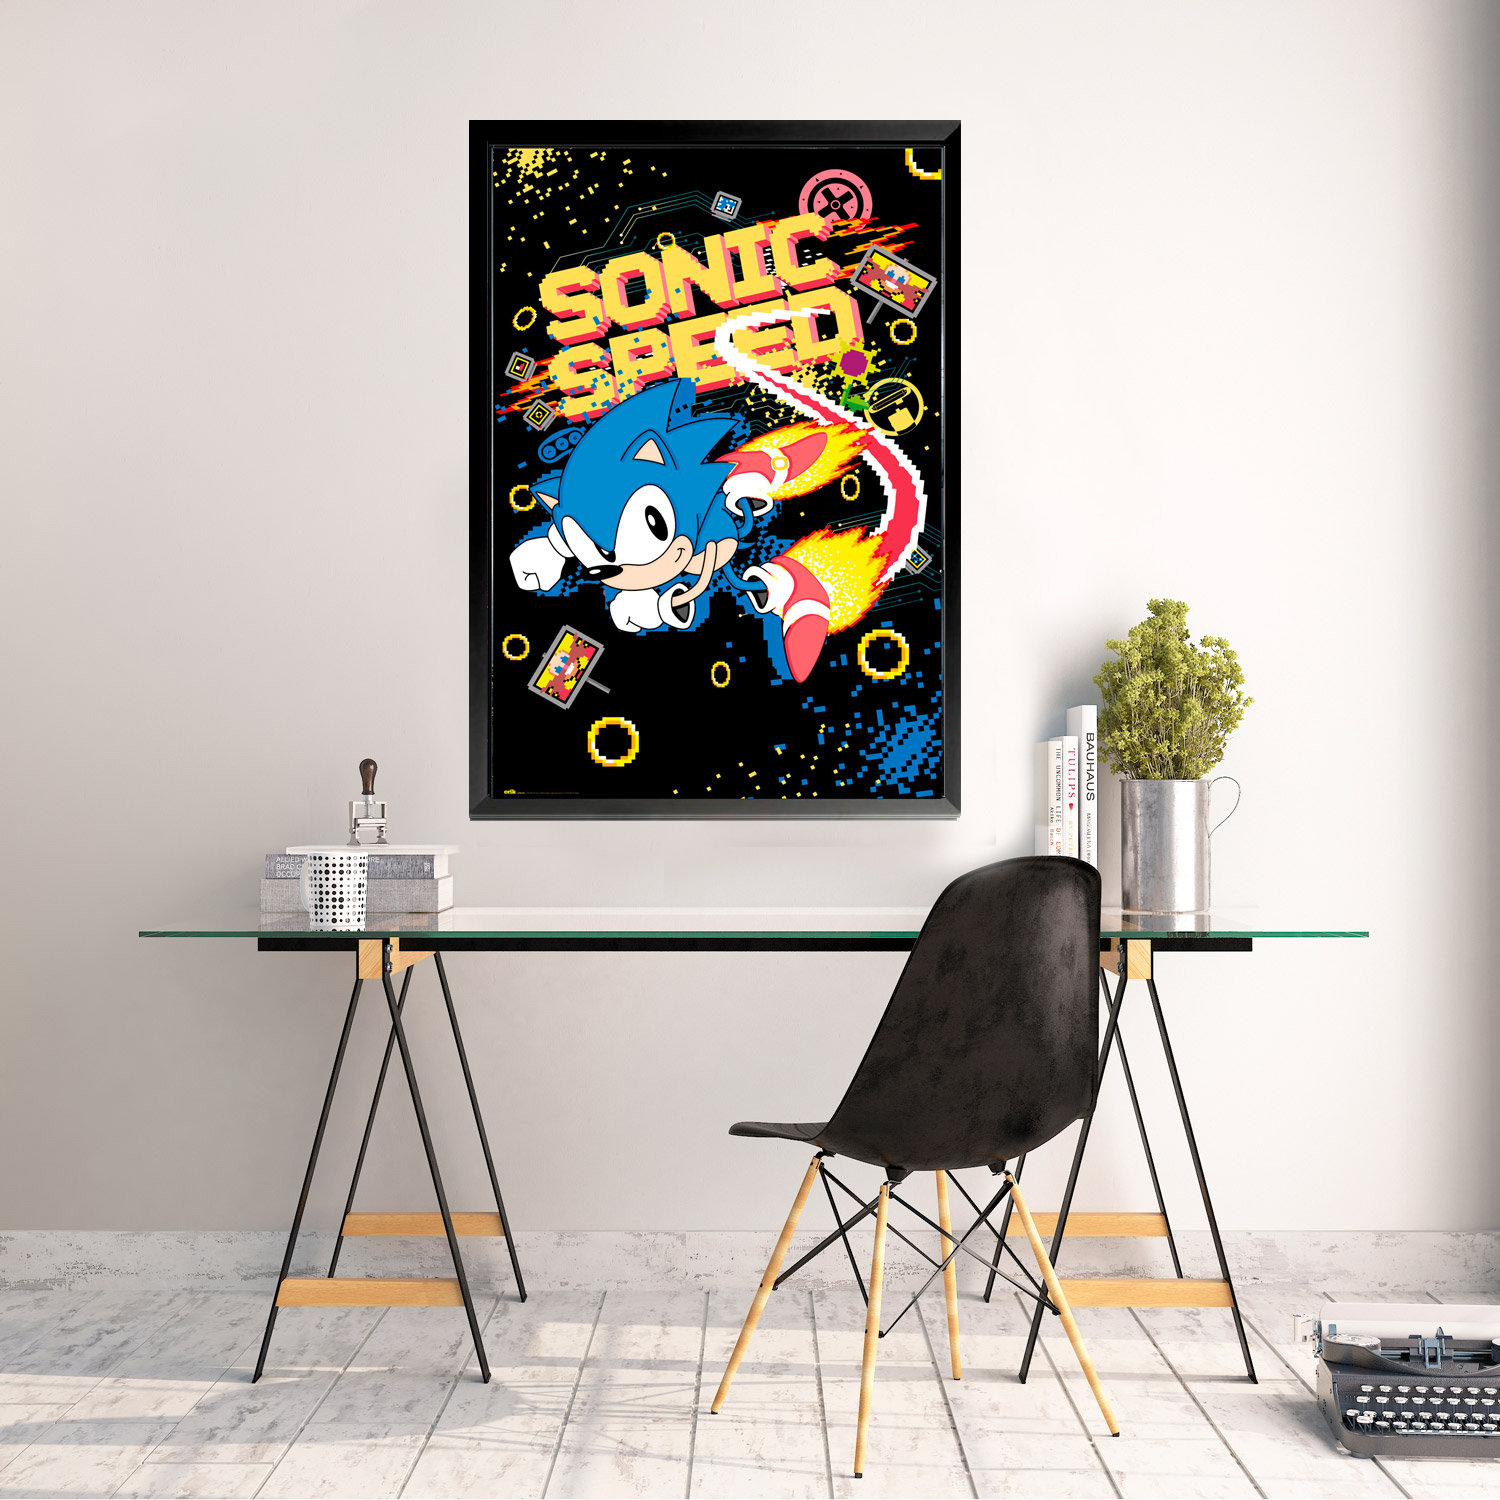 Sonic The Hedgehog Framed Gaming TV Show Poster (Always Running) (Size: 24" x 36")